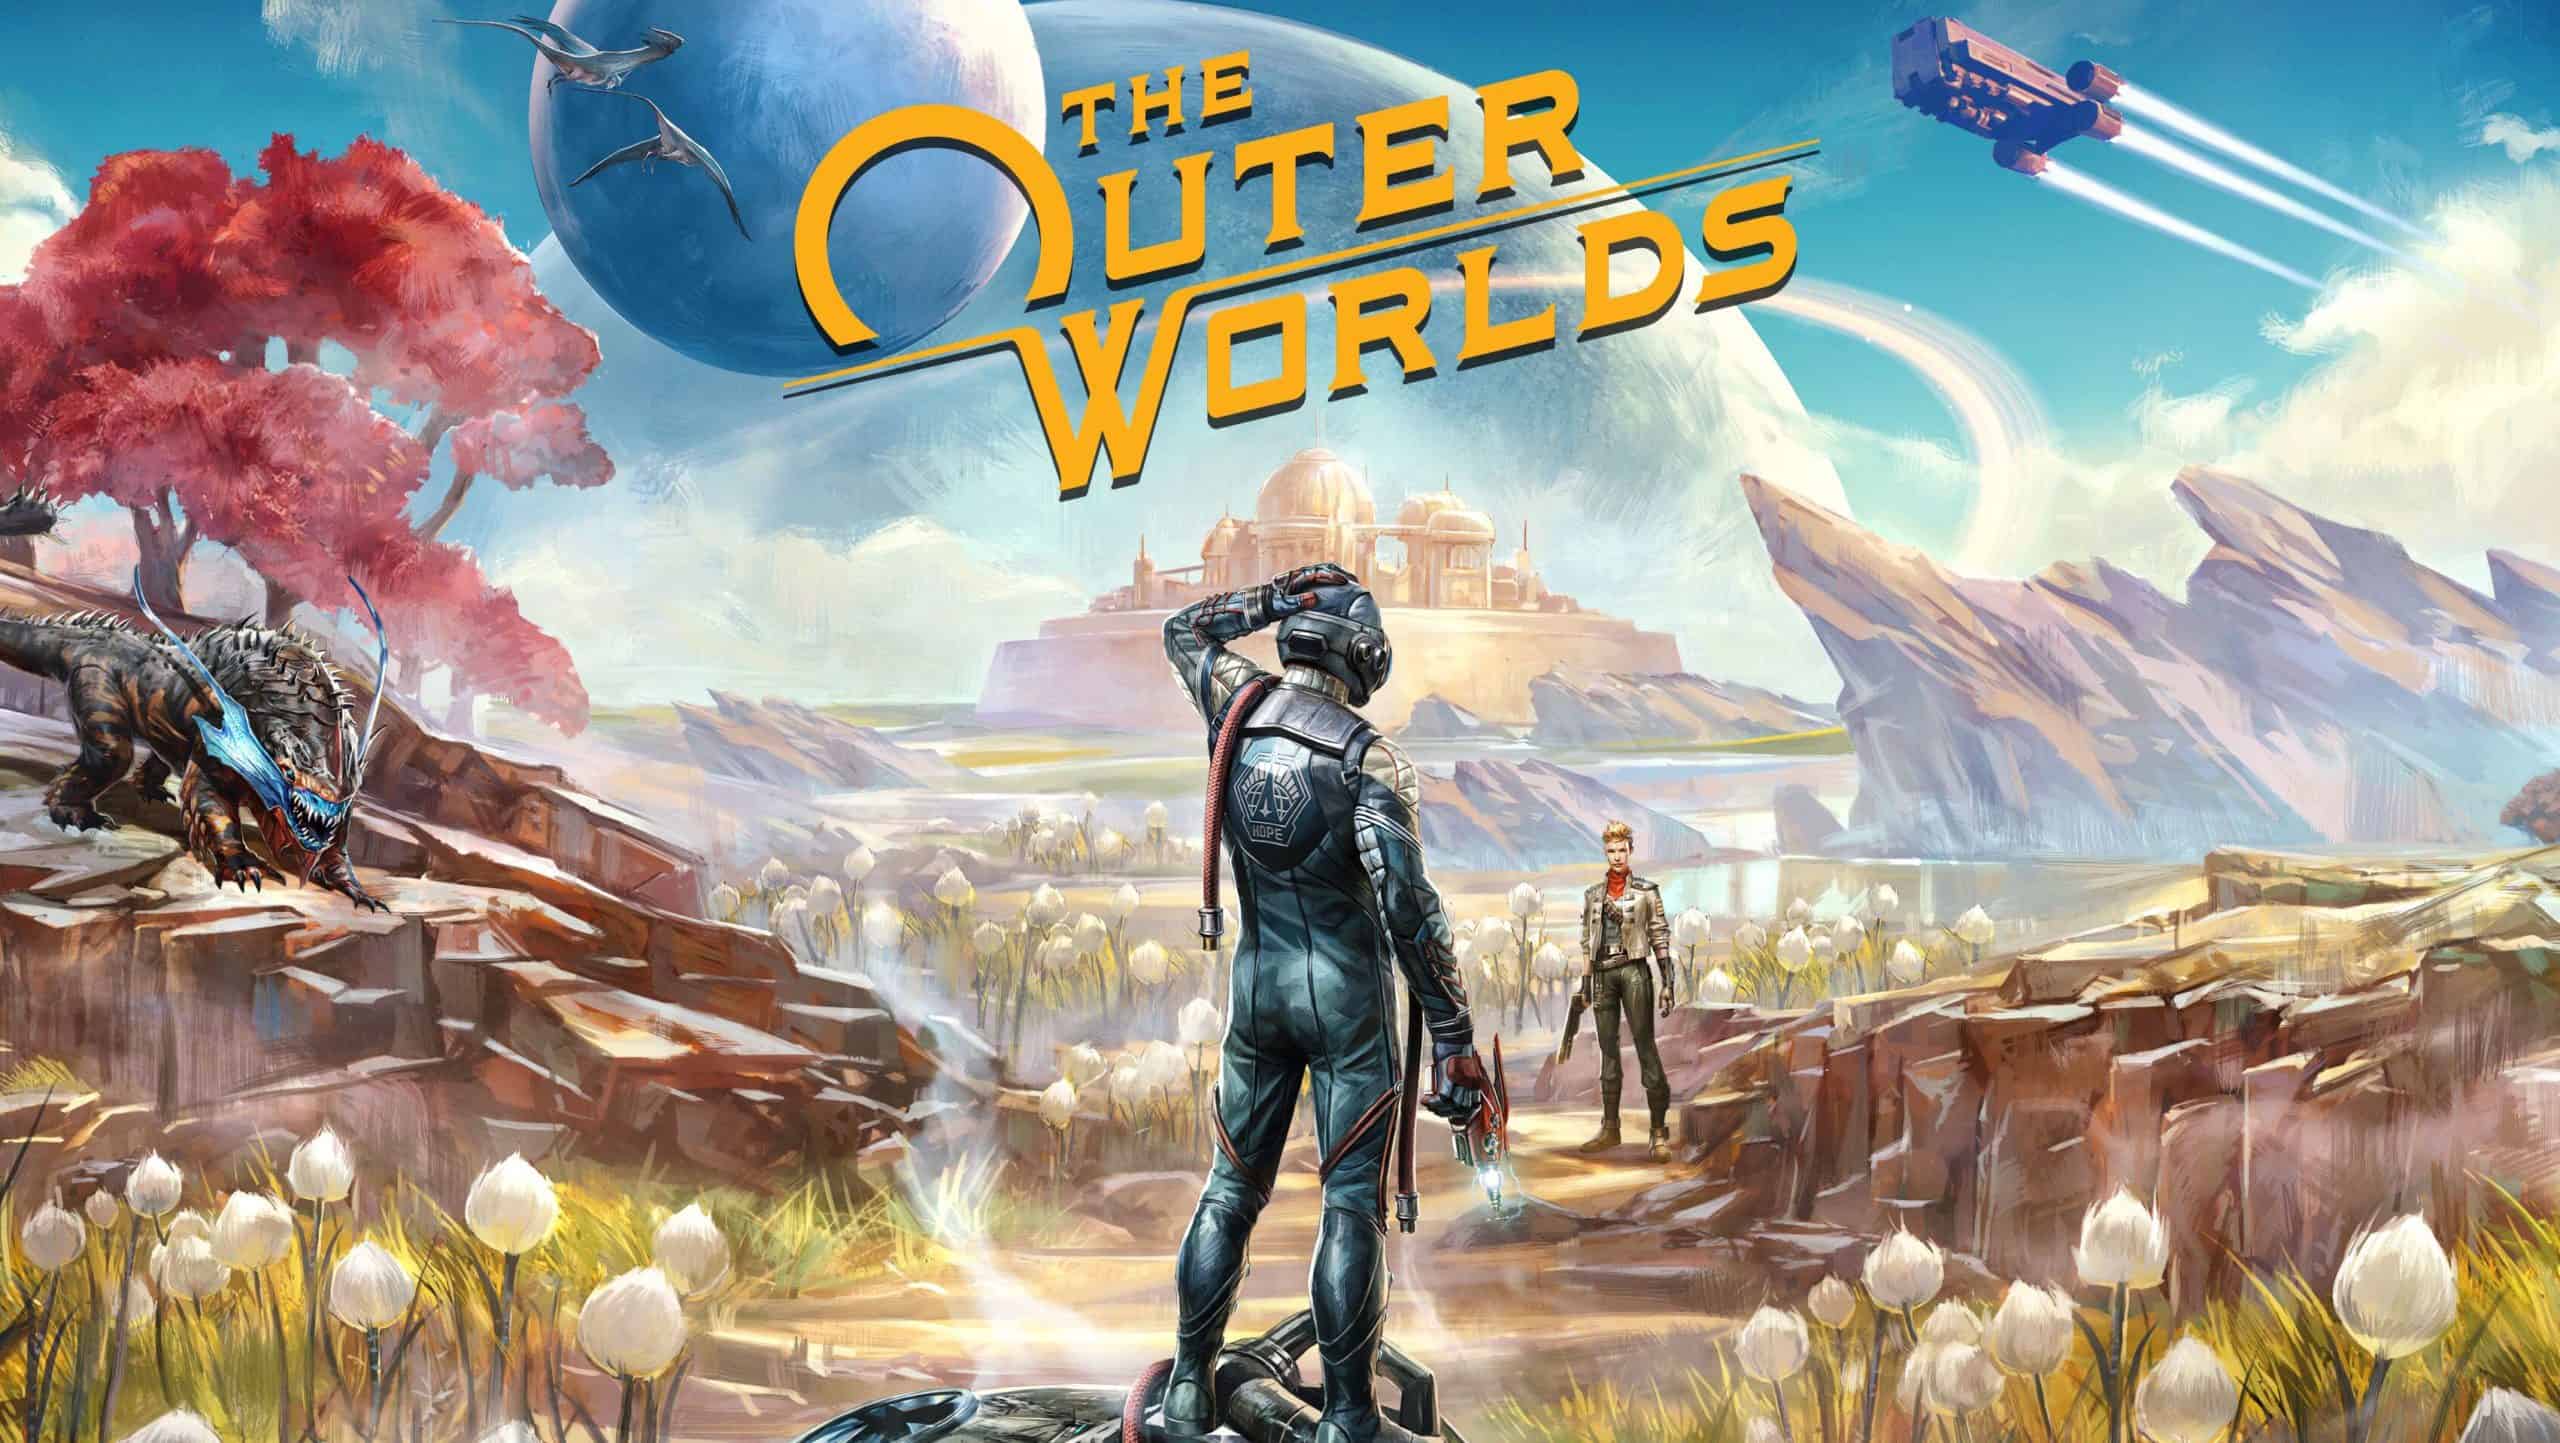 The Outer Worlds Game Information